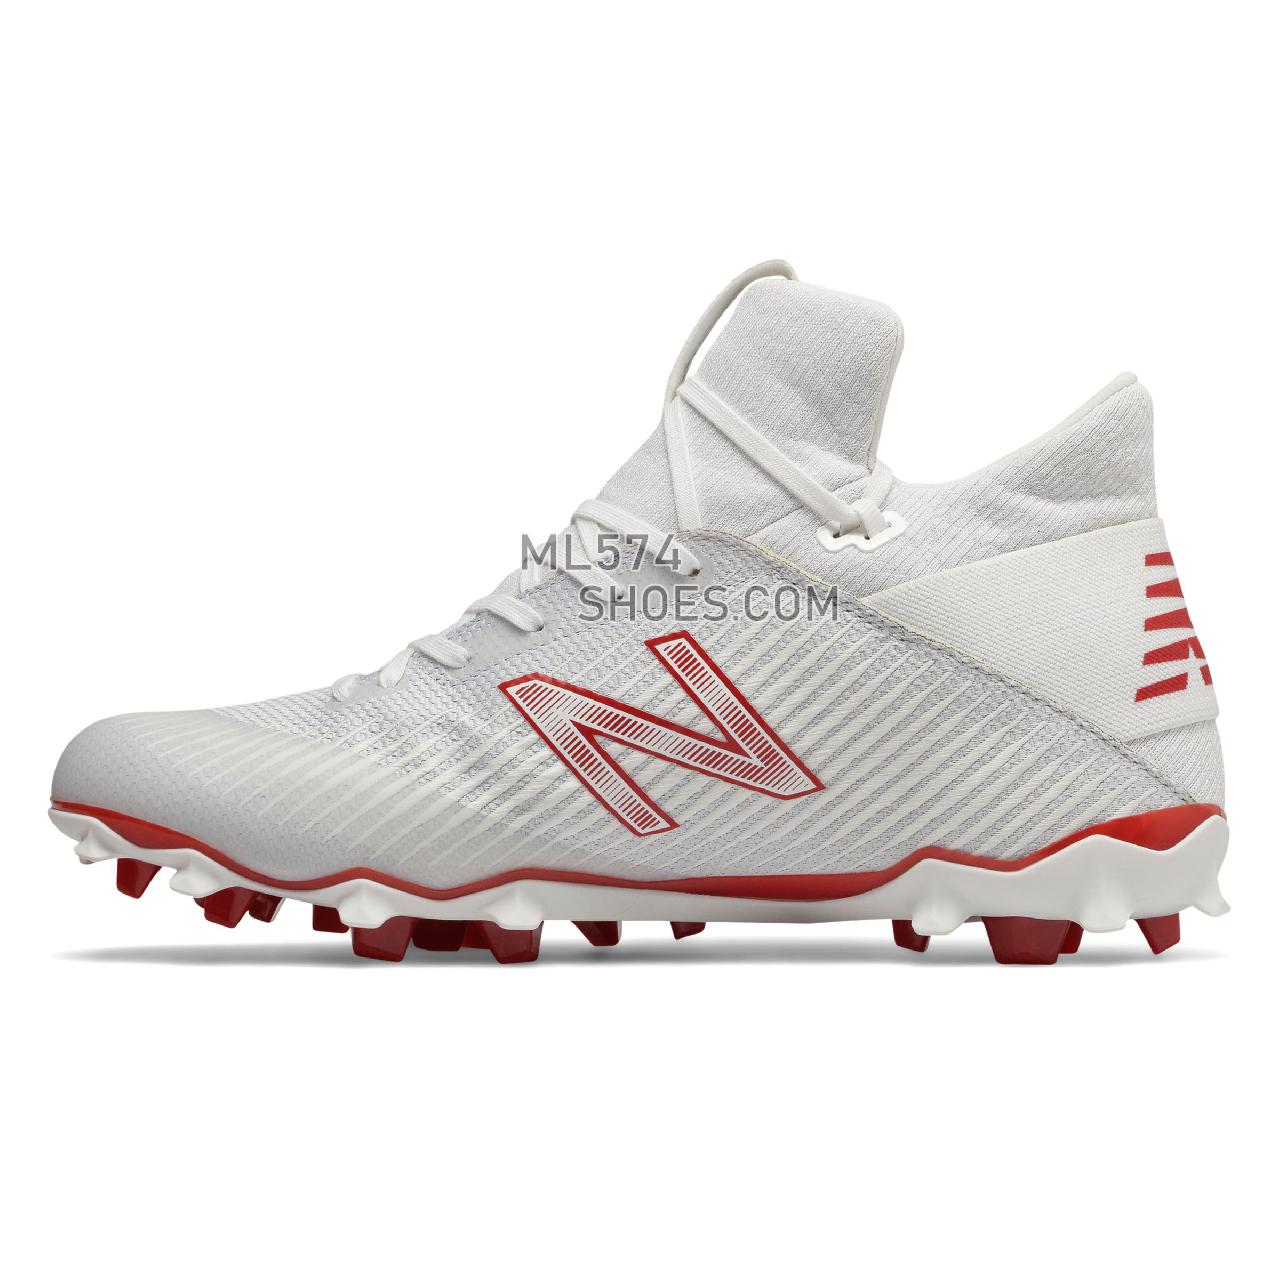 New Balance FreezeLX 2.0 - Men's 2 - Lacrosse White with Red - FREEZRD2